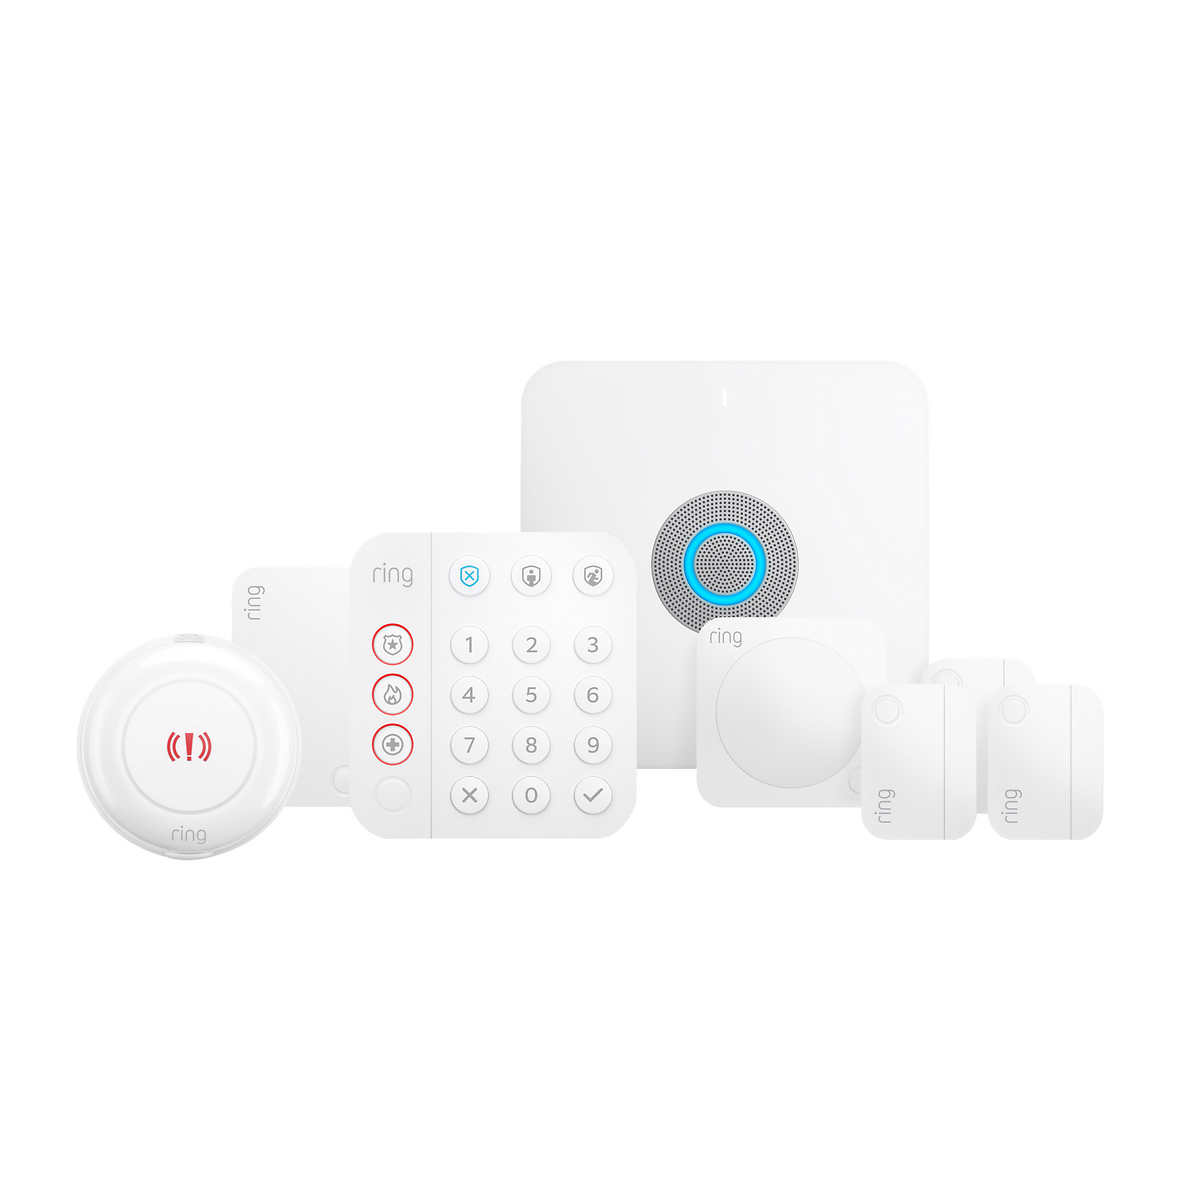 Ring Alarm 8-piece Home Security Kit (Gen 2) with Included Panic Button, Motion Detector and Contact Sensors